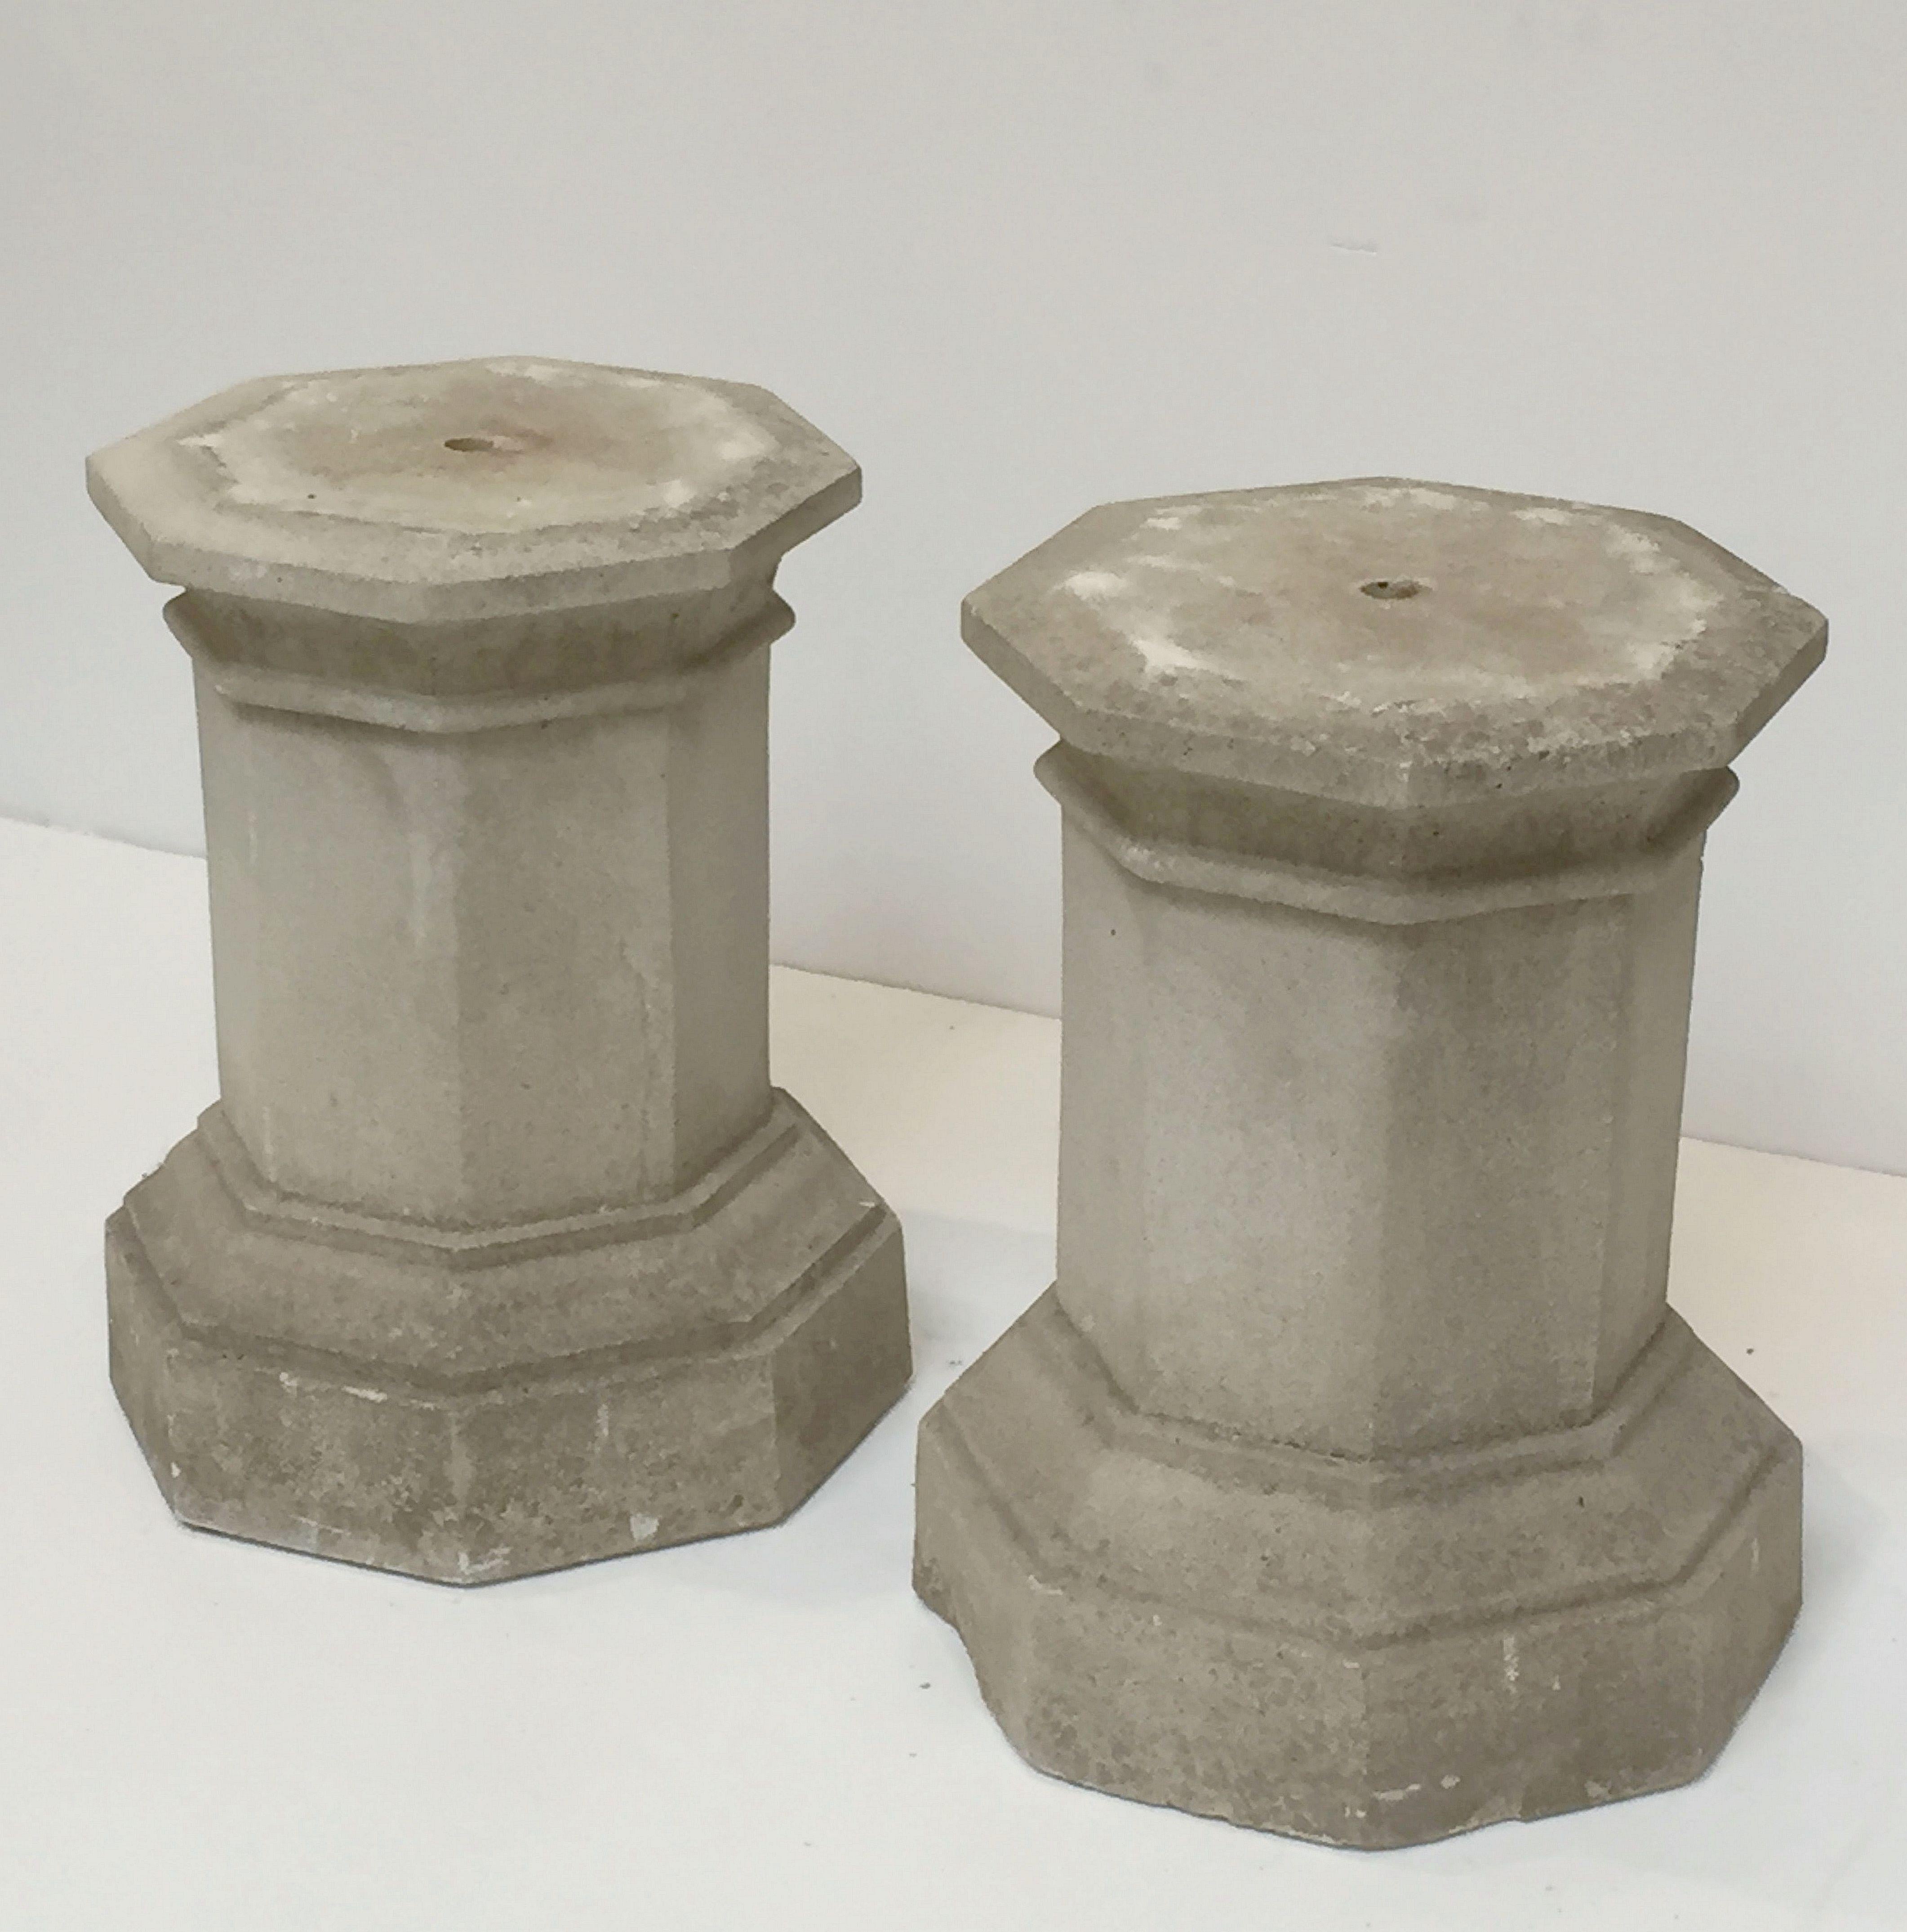 A fine pair of English octagonal sided column pillars or pedestal plinth supports of composition stone - for urns, planter pots, or statuary.

Perfect for an indoor or outdoor garden room, garden, or conservatory!

Two available - Individually